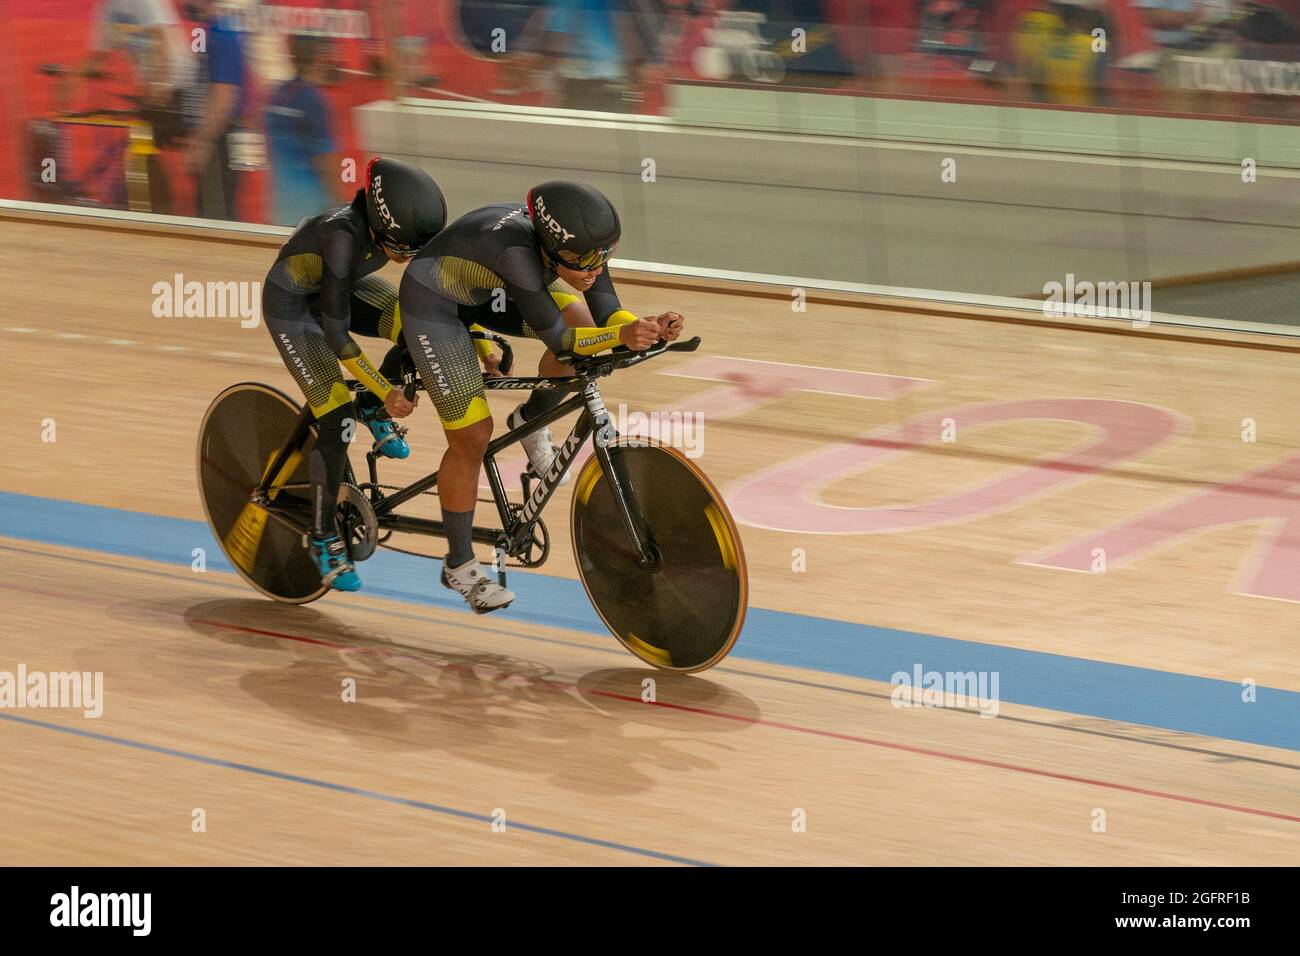 Tokyo, Japan. 26th Aug, 2021. Nur Azlia Syafinaz Mohd Zais and pilot Nurul Suhada Zainal of Malaysia run cycling track for women 1000m time trial at Izu Velodrome during Tokyo 2020 Paralympic Games. Because of COVID-19 pandemic games were postponed by a year and there were no spectators allowed into venues. (Photo by Lev Radin/Pacific Press) Credit: Pacific Press Media Production Corp./Alamy Live News Stock Photo